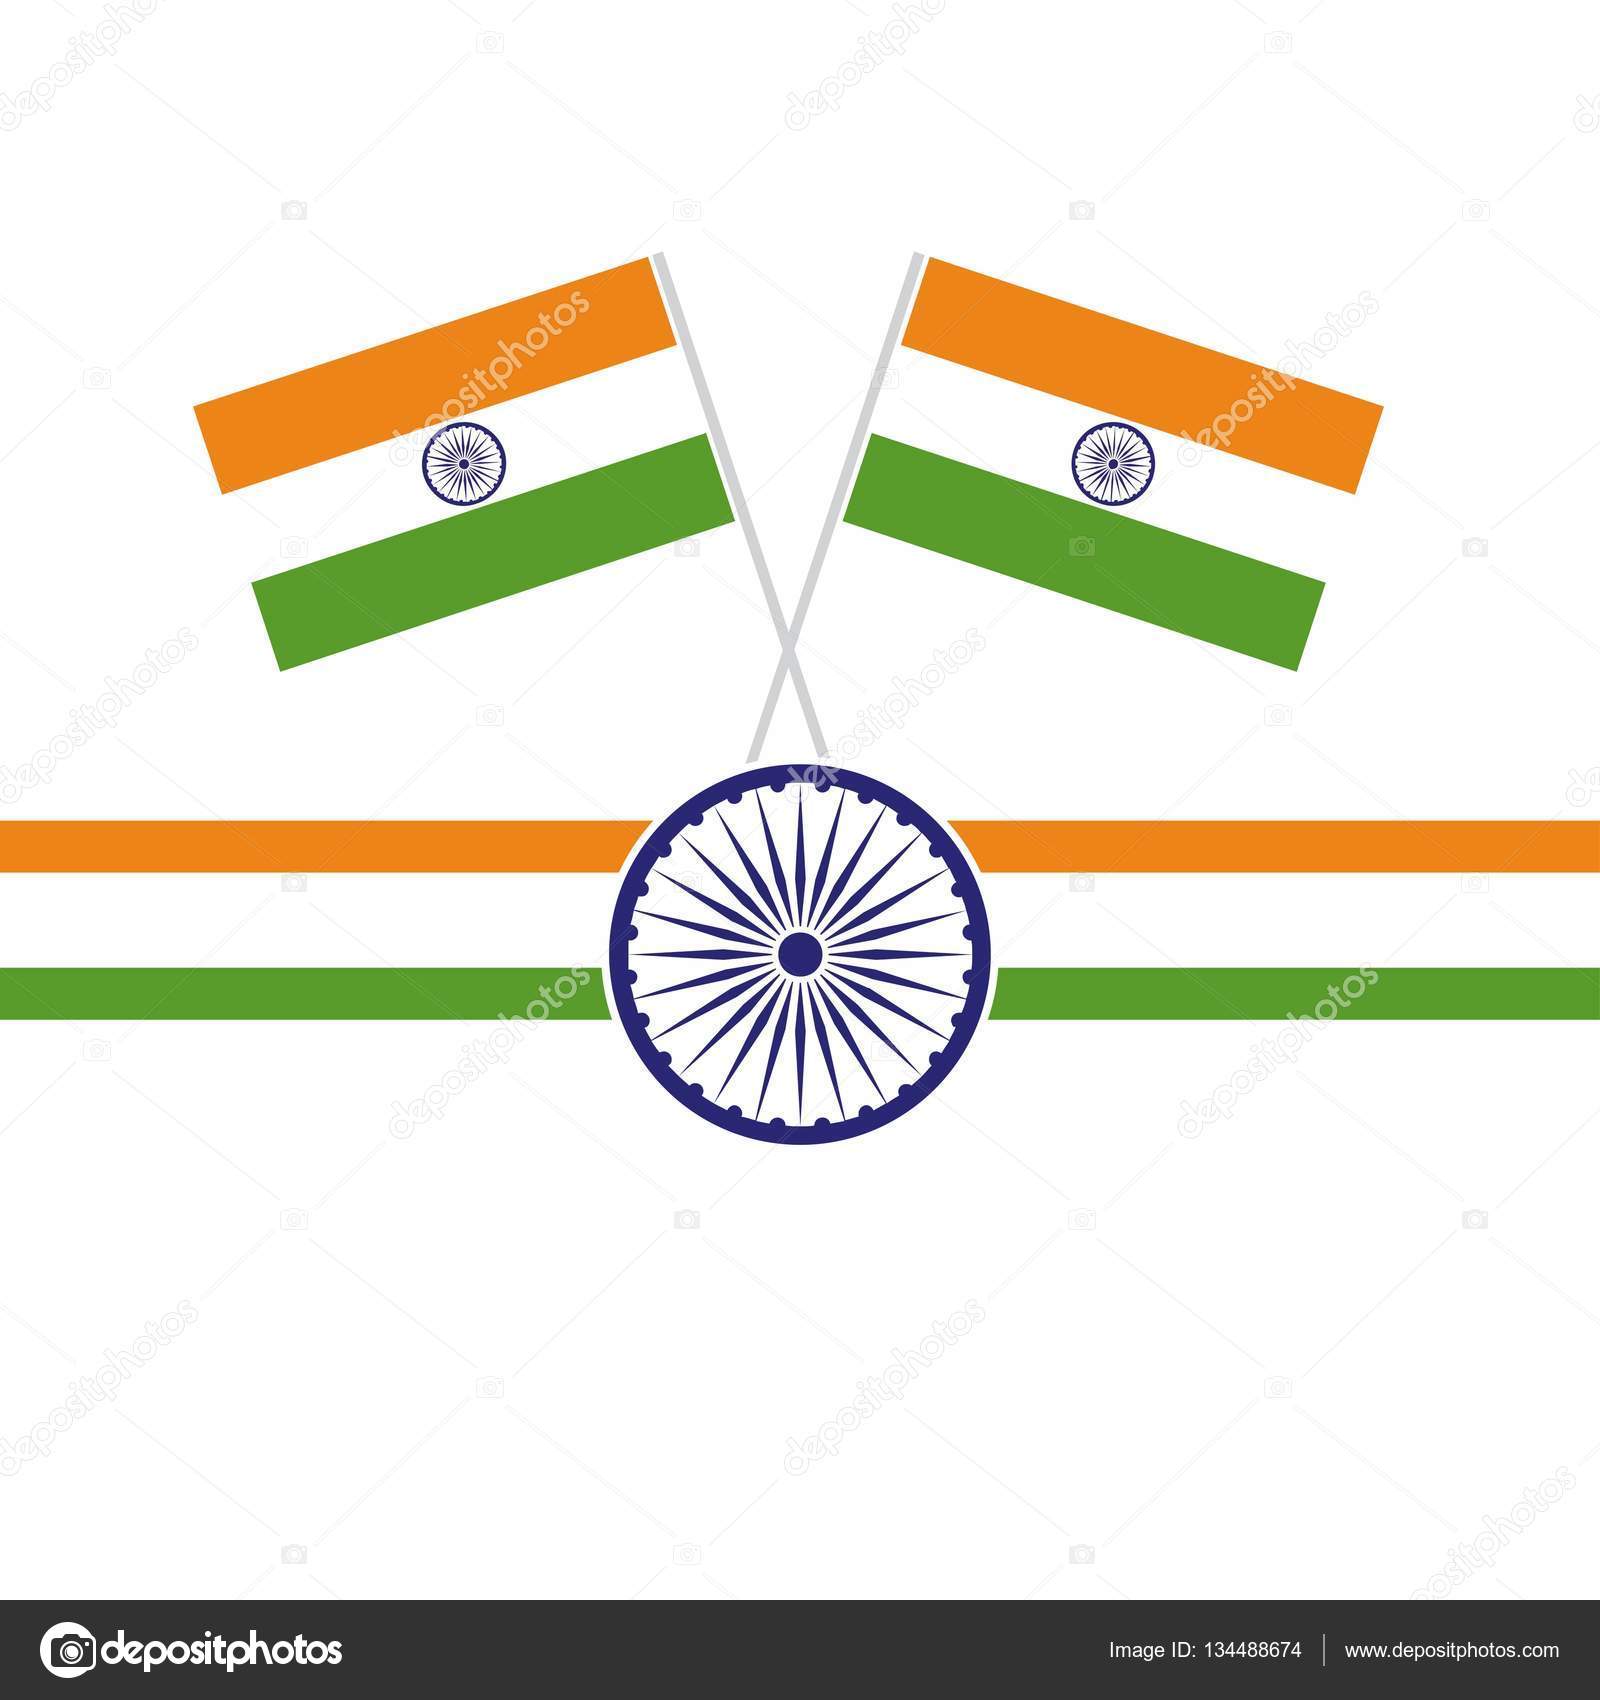 Download Indian Flag Tiranga wallpaper by ManishGaikar - c6 - Free on  ZEDGE™ now. Browse millions of popul… | Indian flag wallpaper, Indian flag  colors, Indian flag